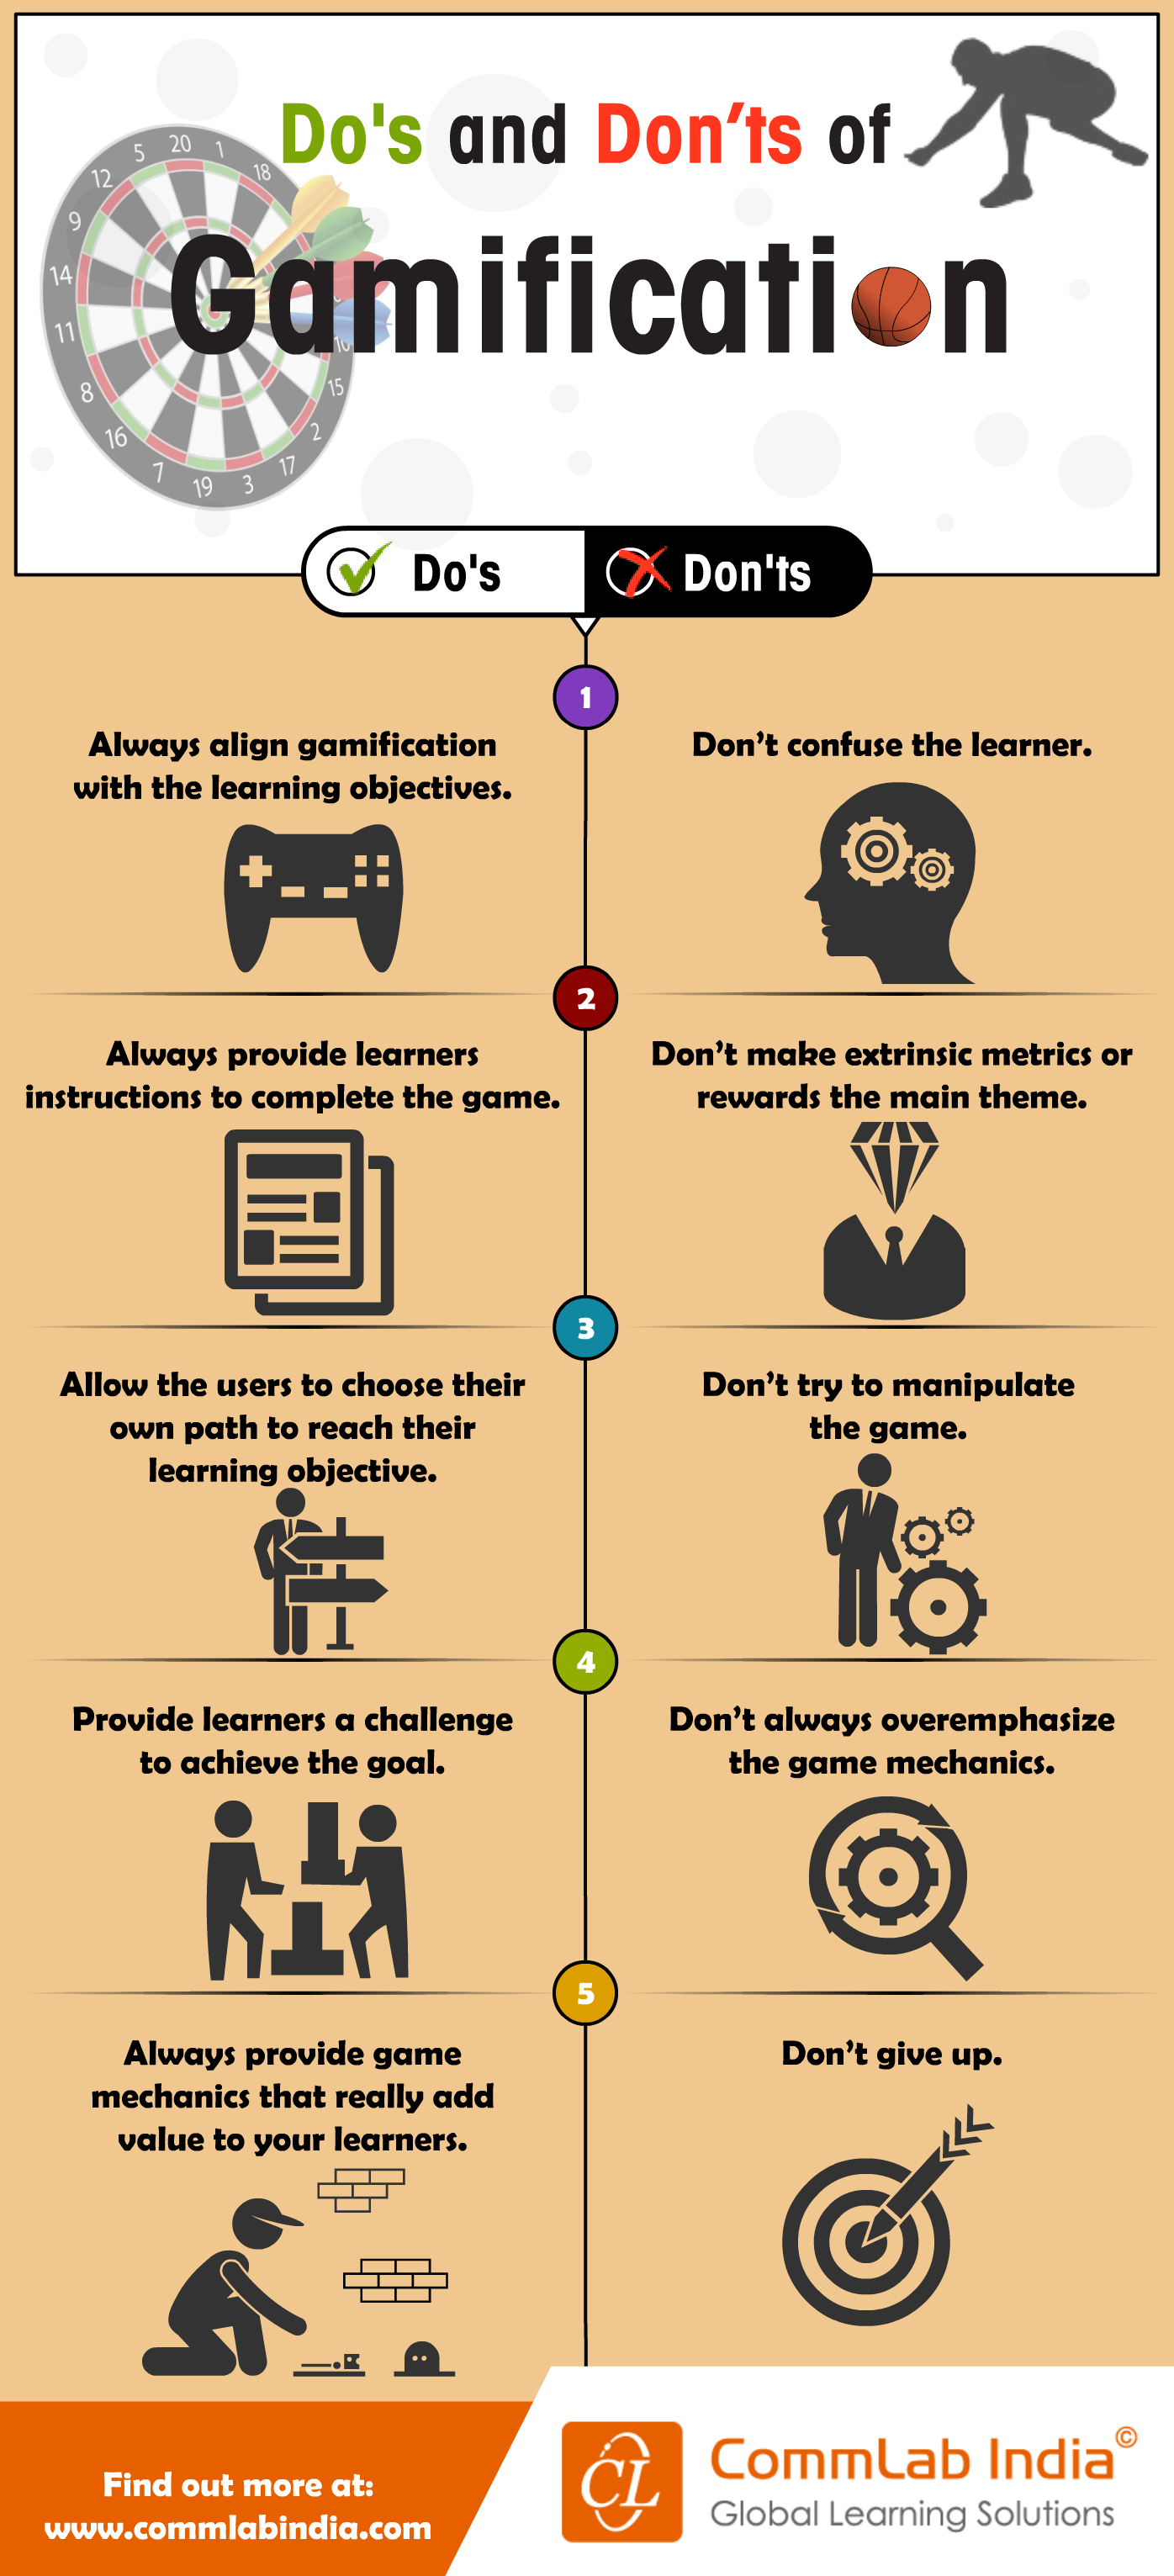 5 Do’s and Don’ts of Gamification [Infographic]